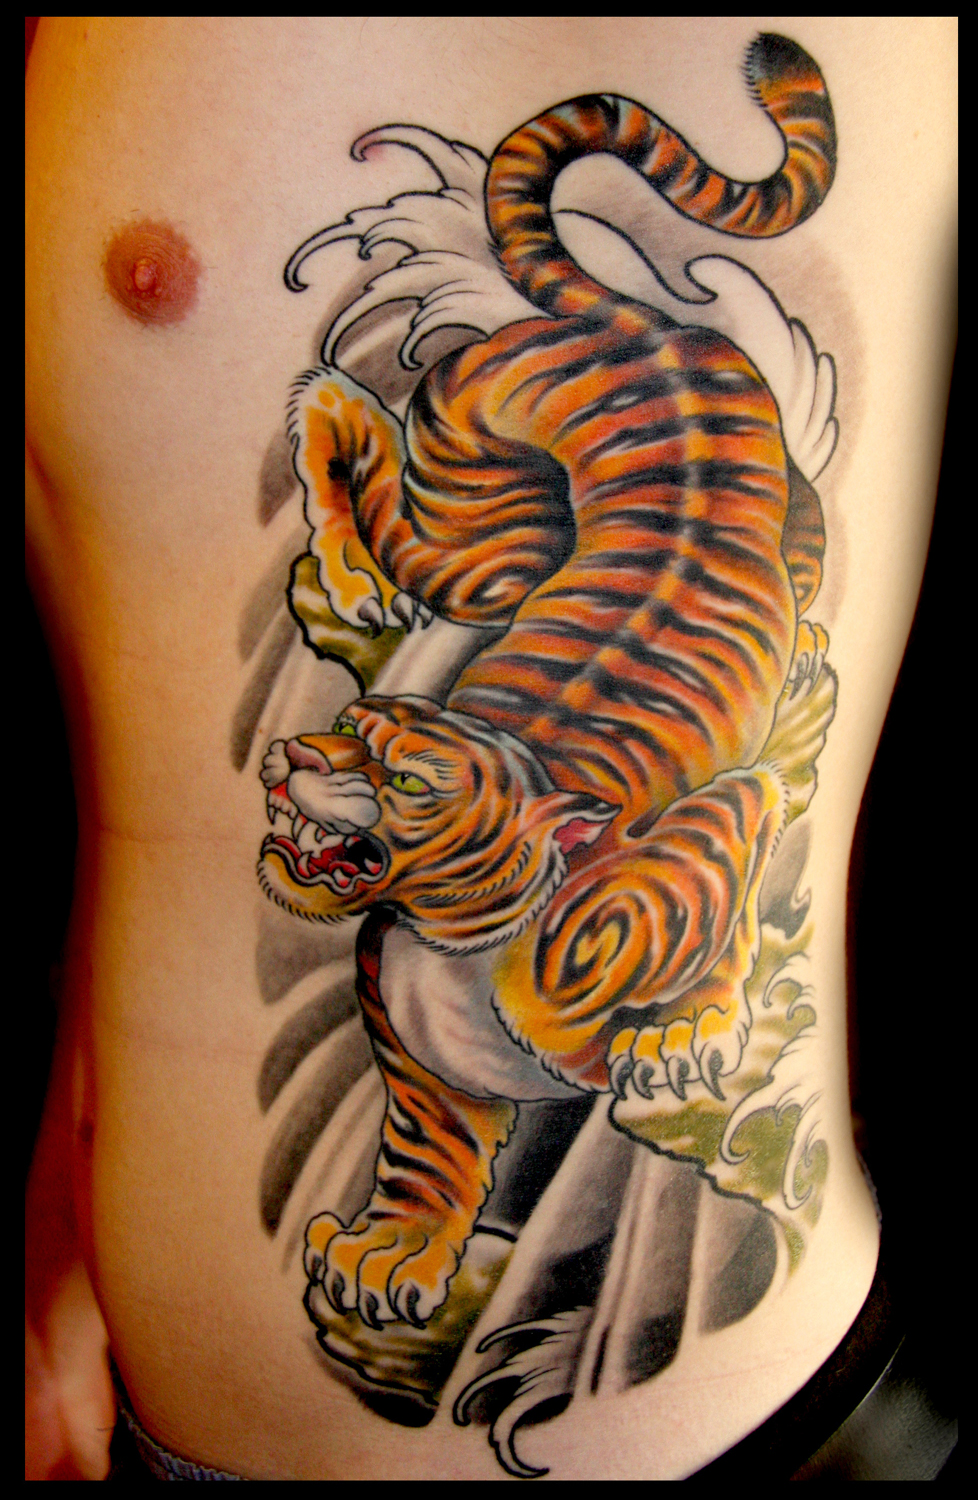 Tiger on ribs by Cory Norris: TattooNOW